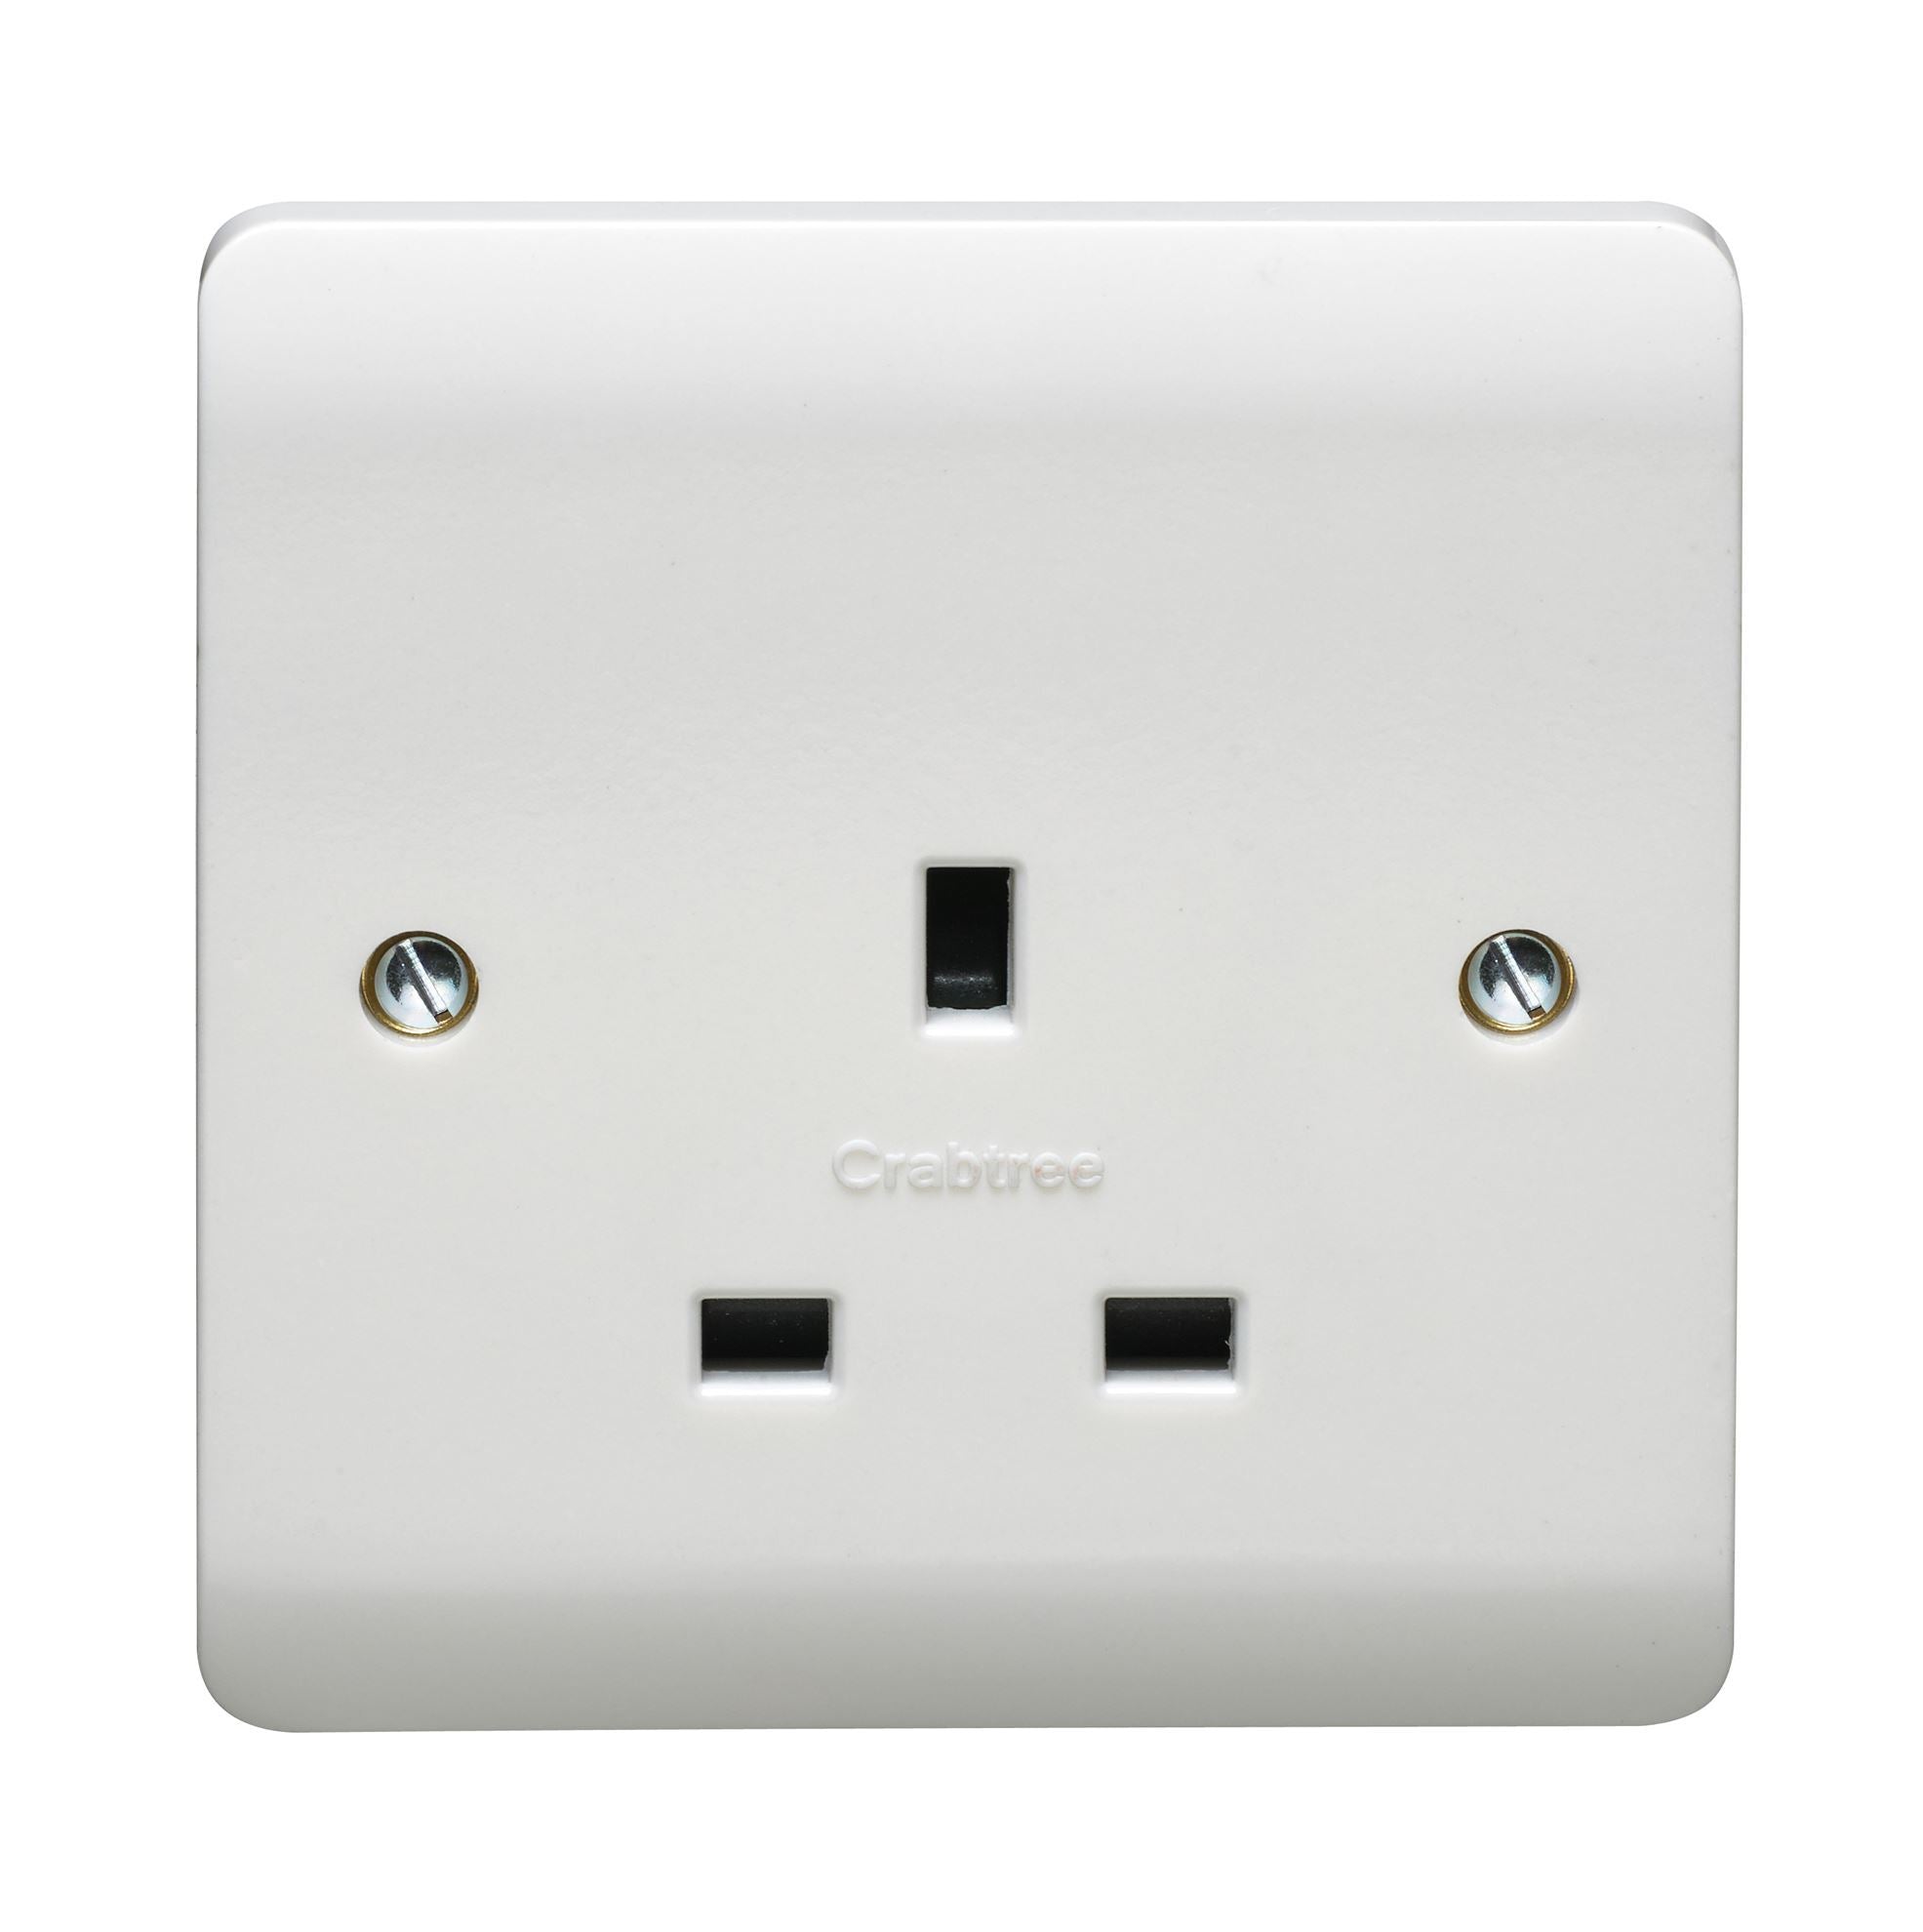 Crabtree Instinct 13A 1G Unswitched Socket Cr1255